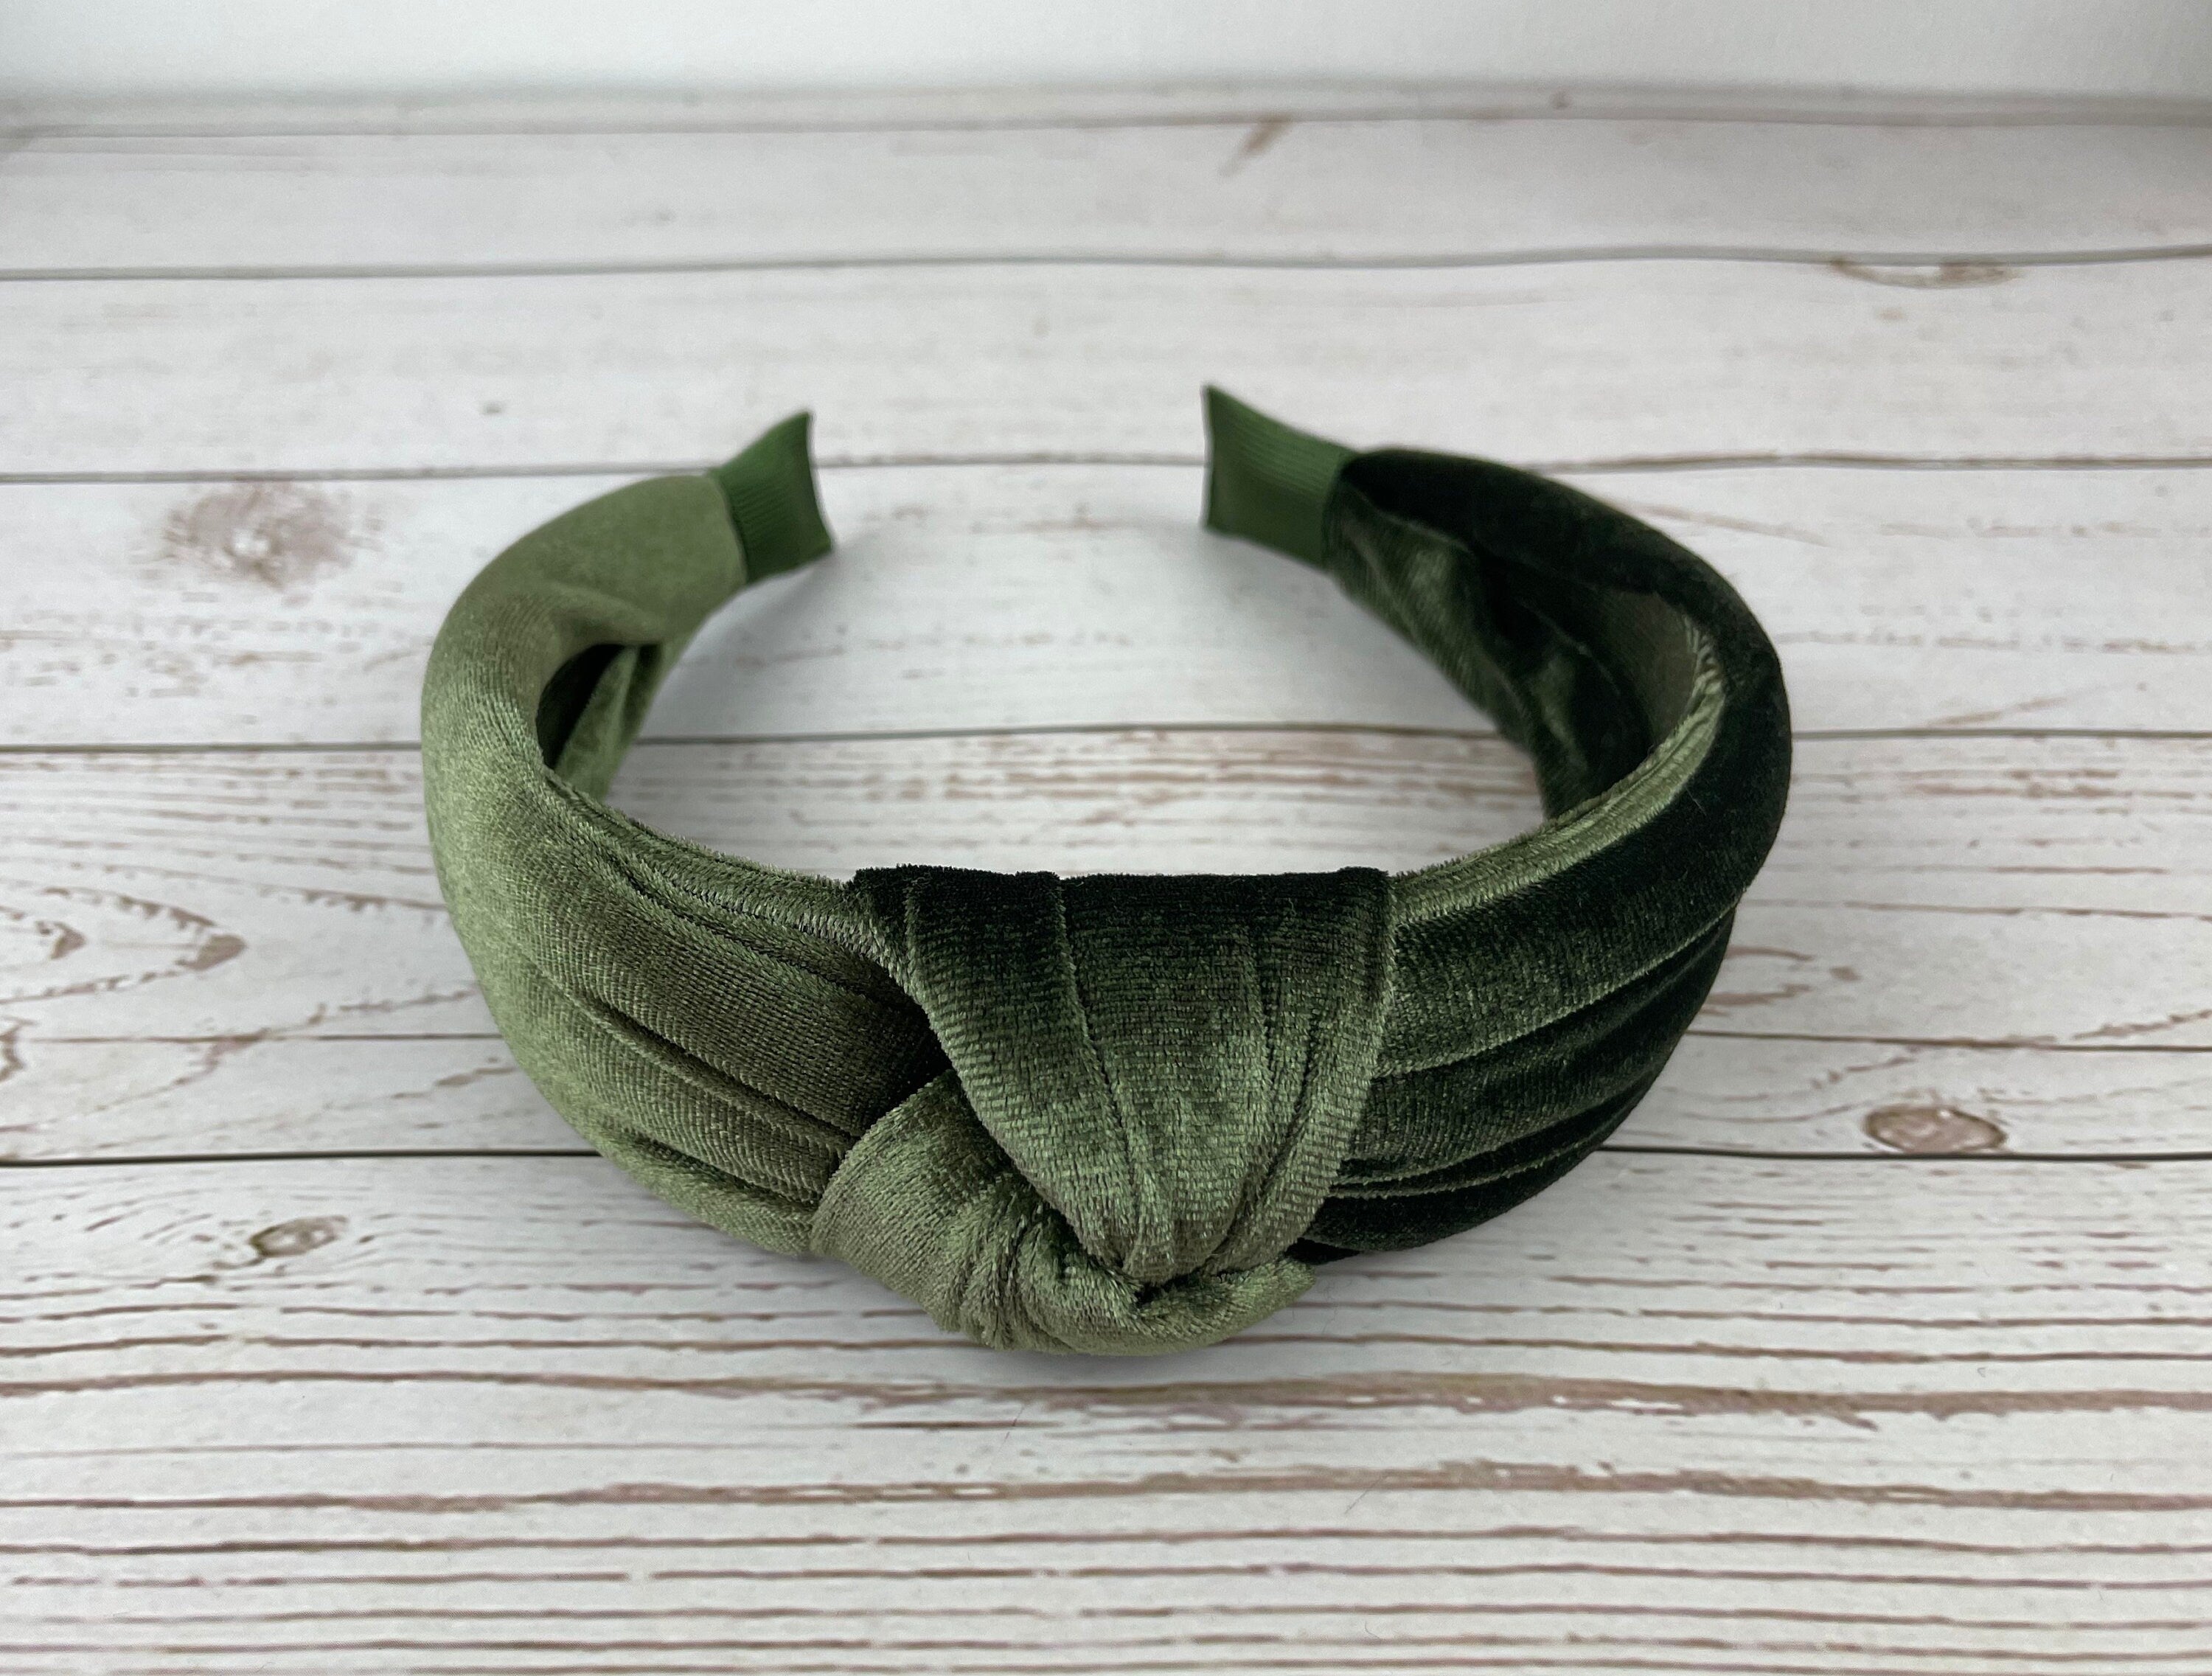 Braided girl&#39;s hairband in a beautiful pea green color - a must-have accessory for any fashion-forward young lady.